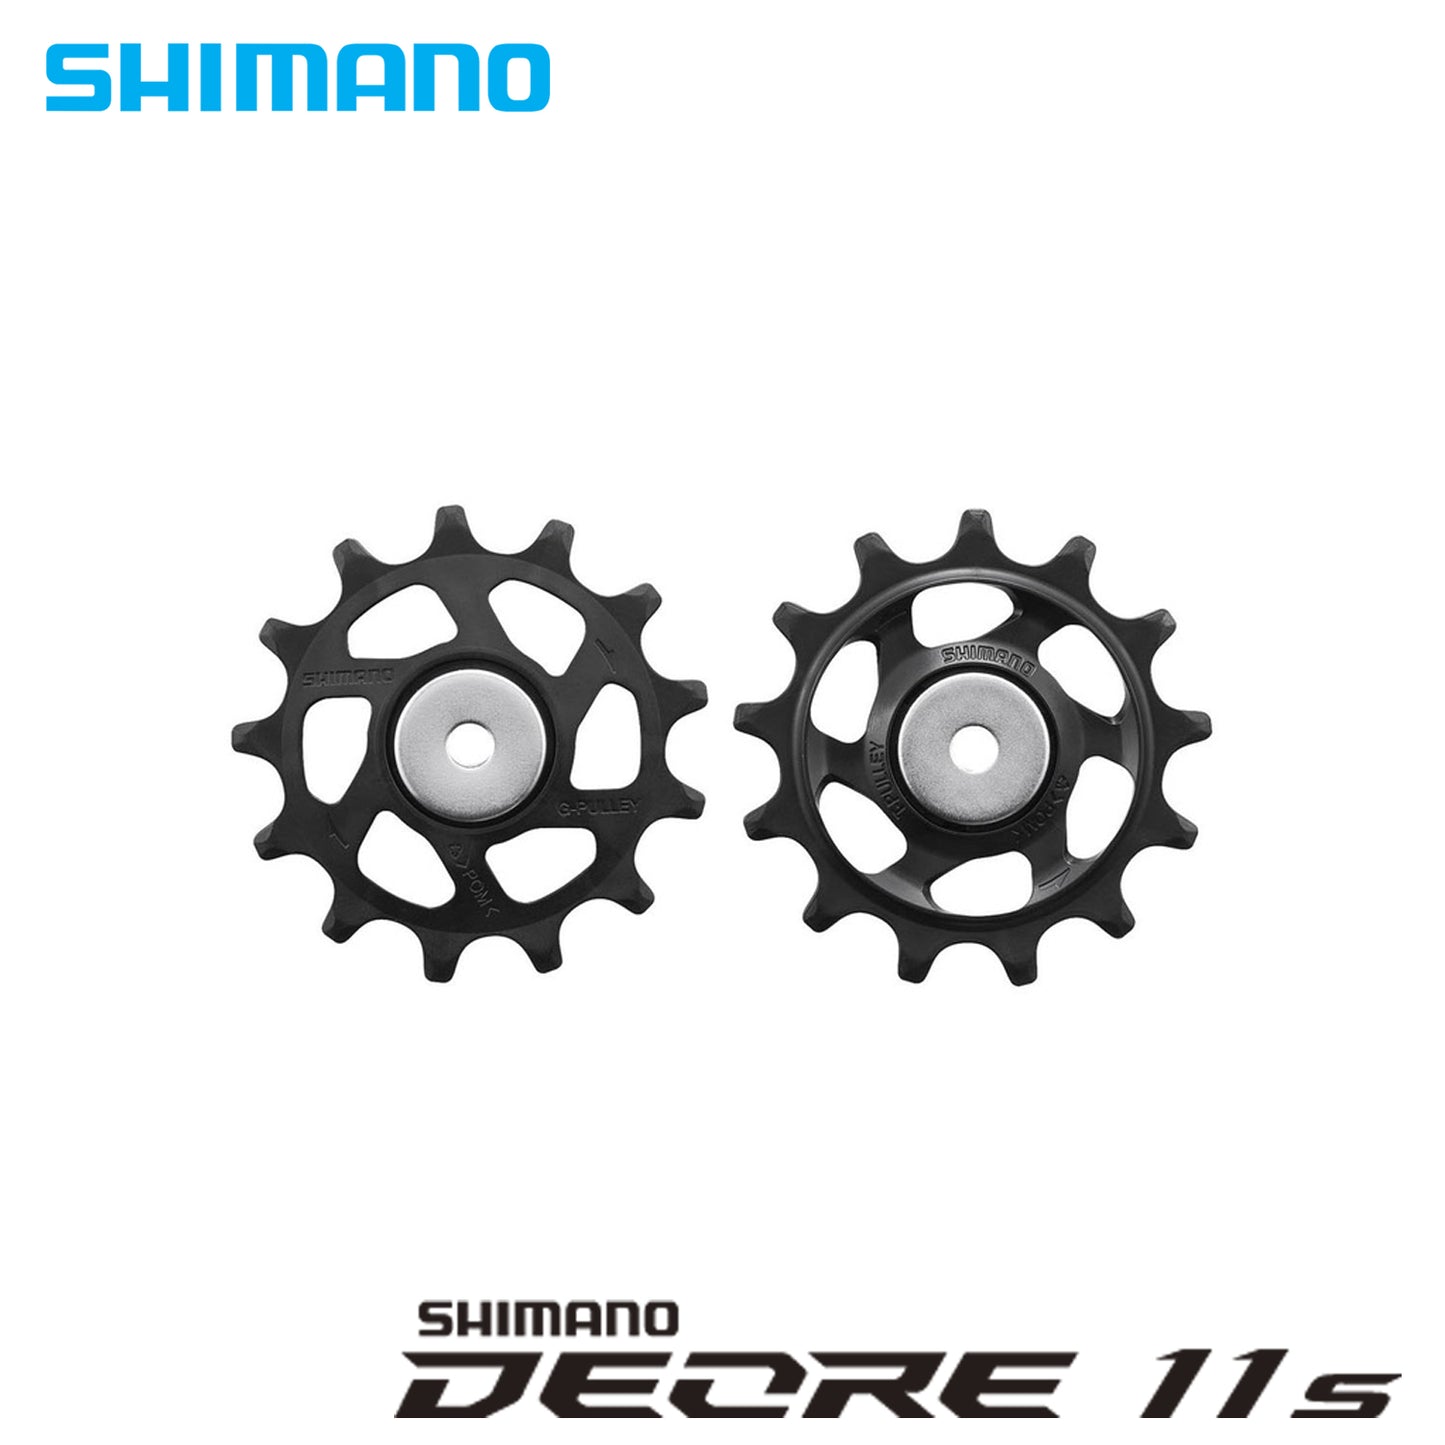 Shimano Pulley Set for M5100 - Y3HL98010